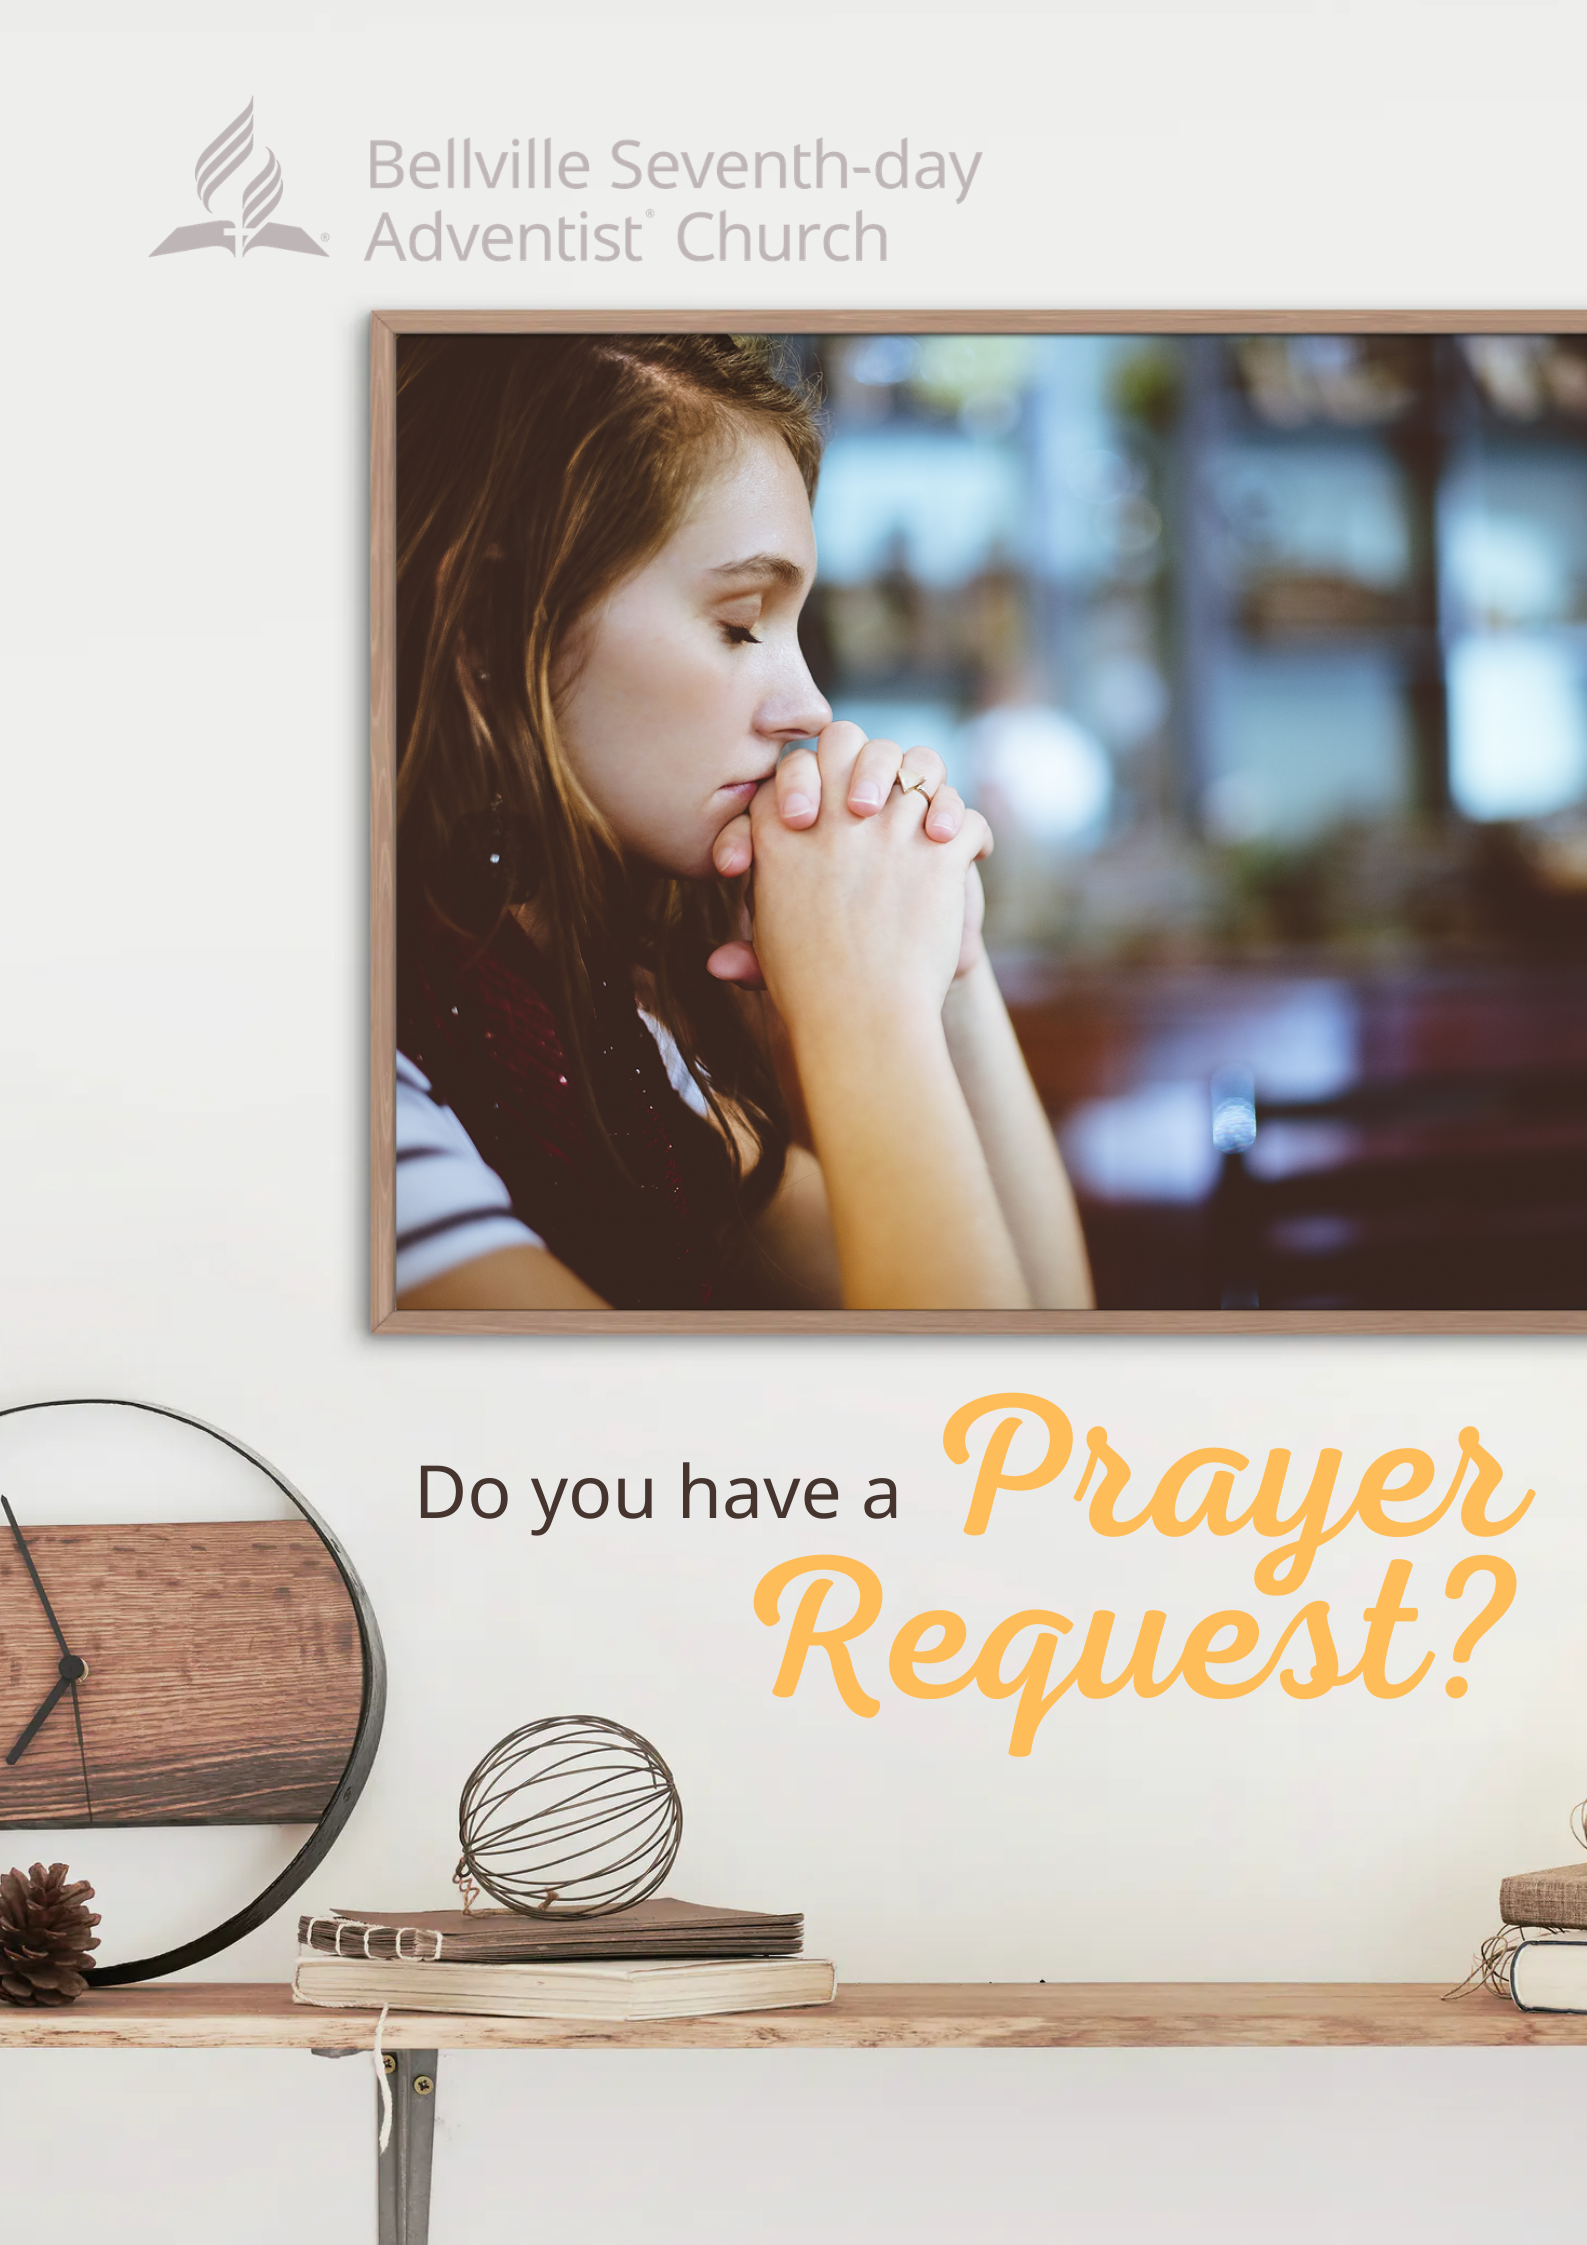 Submit your prayer request here